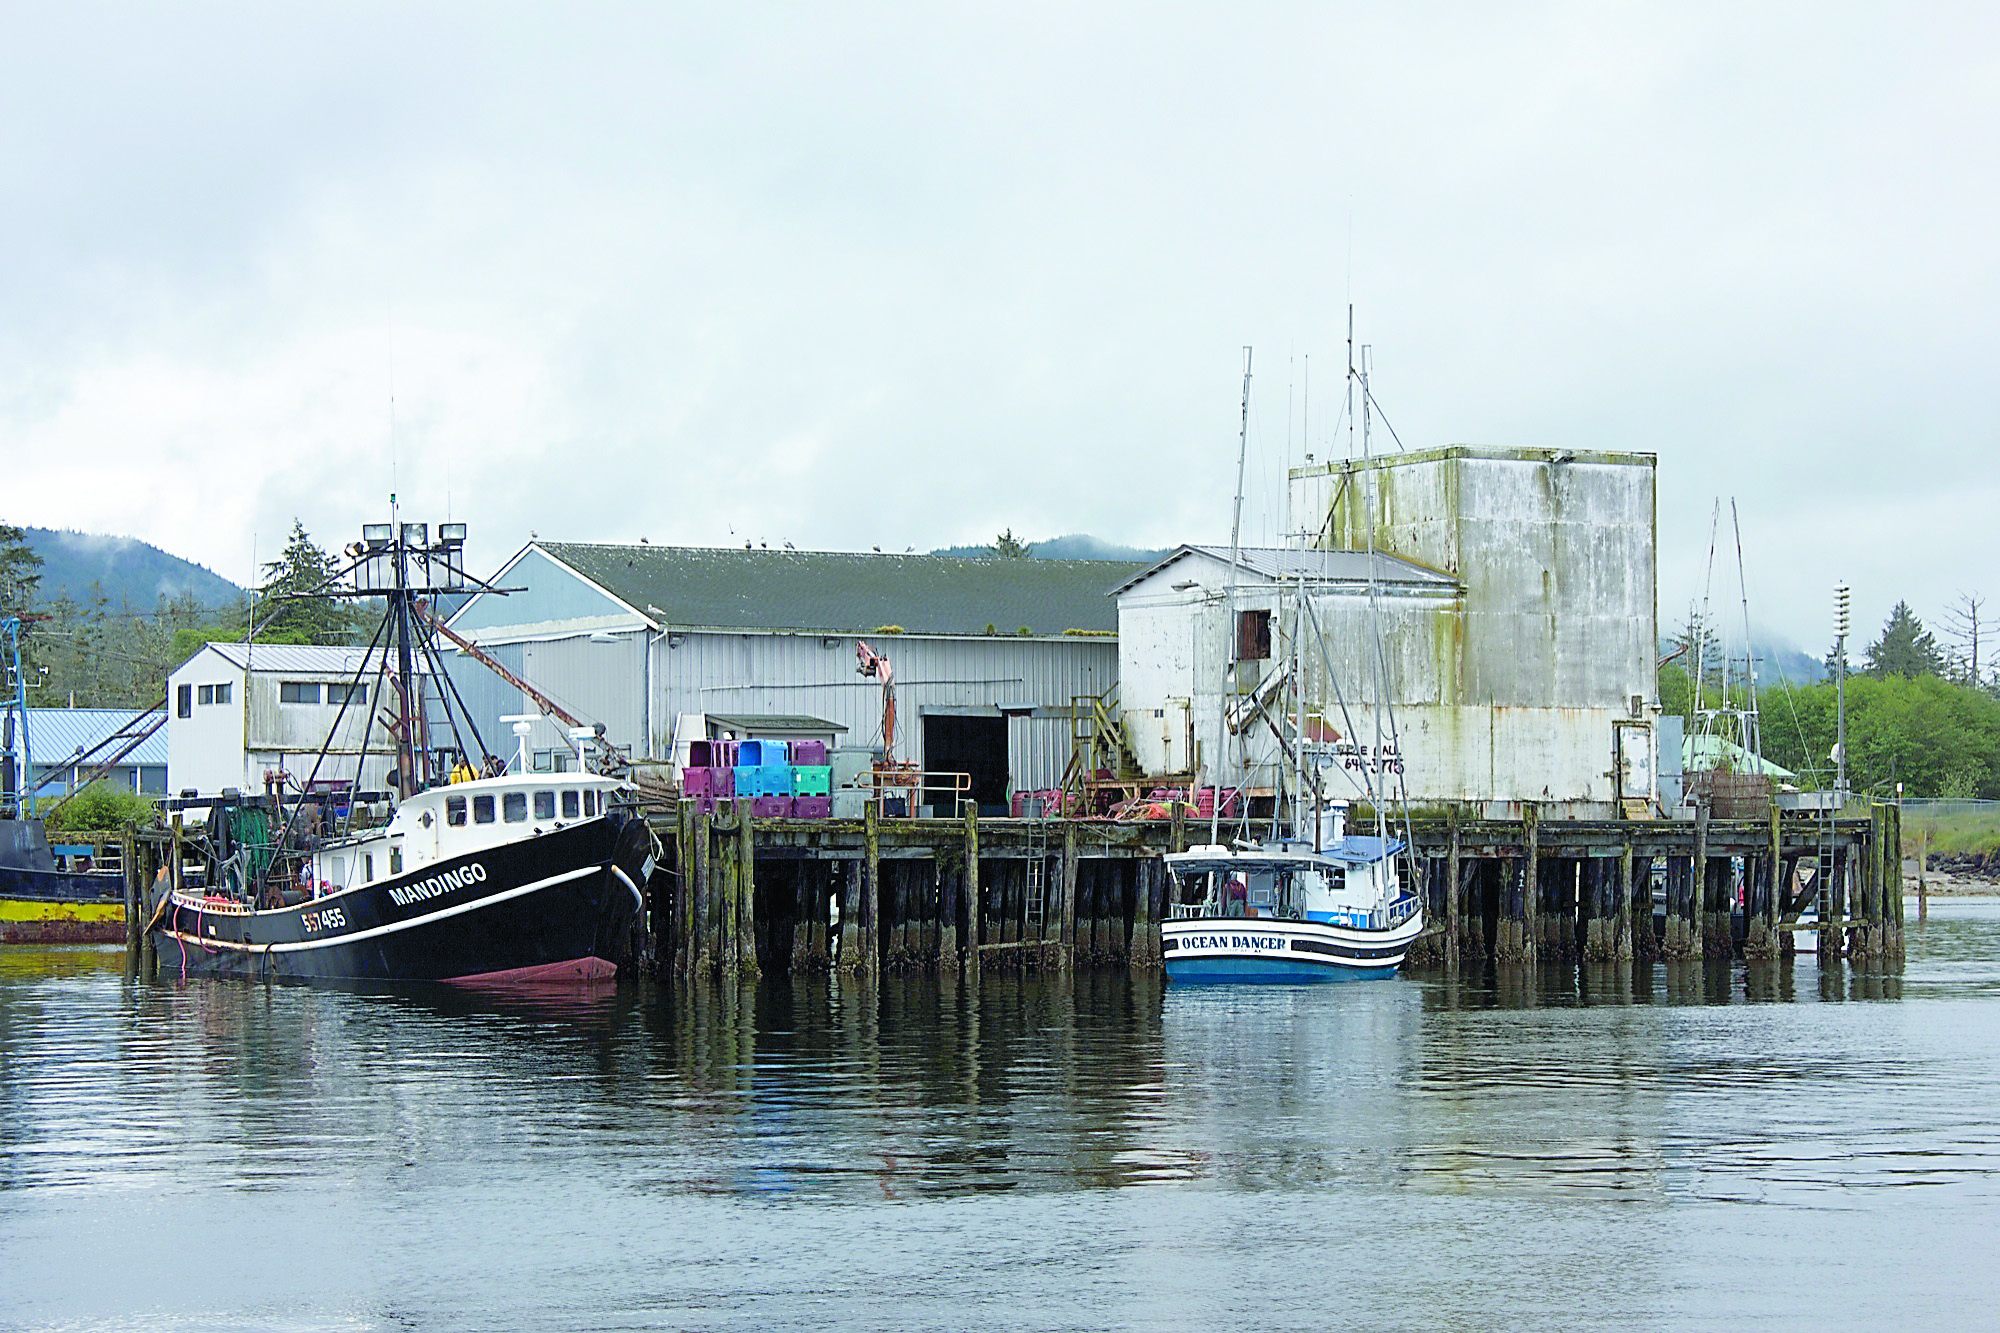 The 65-year-old commercial dock and buildings at Neah Bay.  -- Photo by Jason Roberts/Cape Flattery Fishermen’s Cooperative